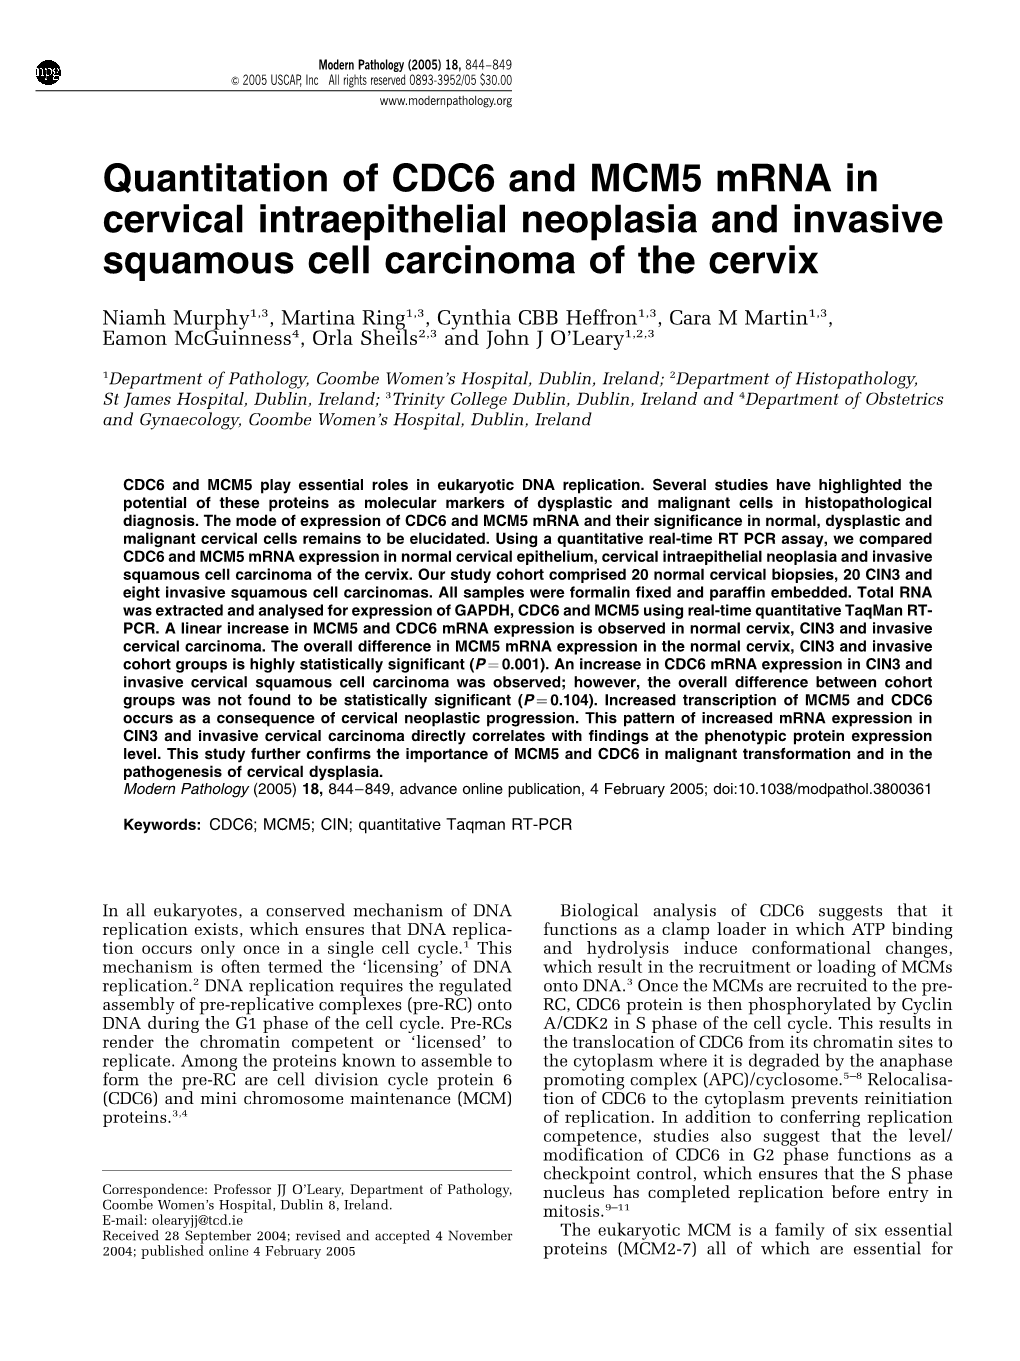 Quantitation of CDC6 and MCM5 Mrna in Cervical Intraepithelial Neoplasia and Invasive Squamous Cell Carcinoma of the Cervix